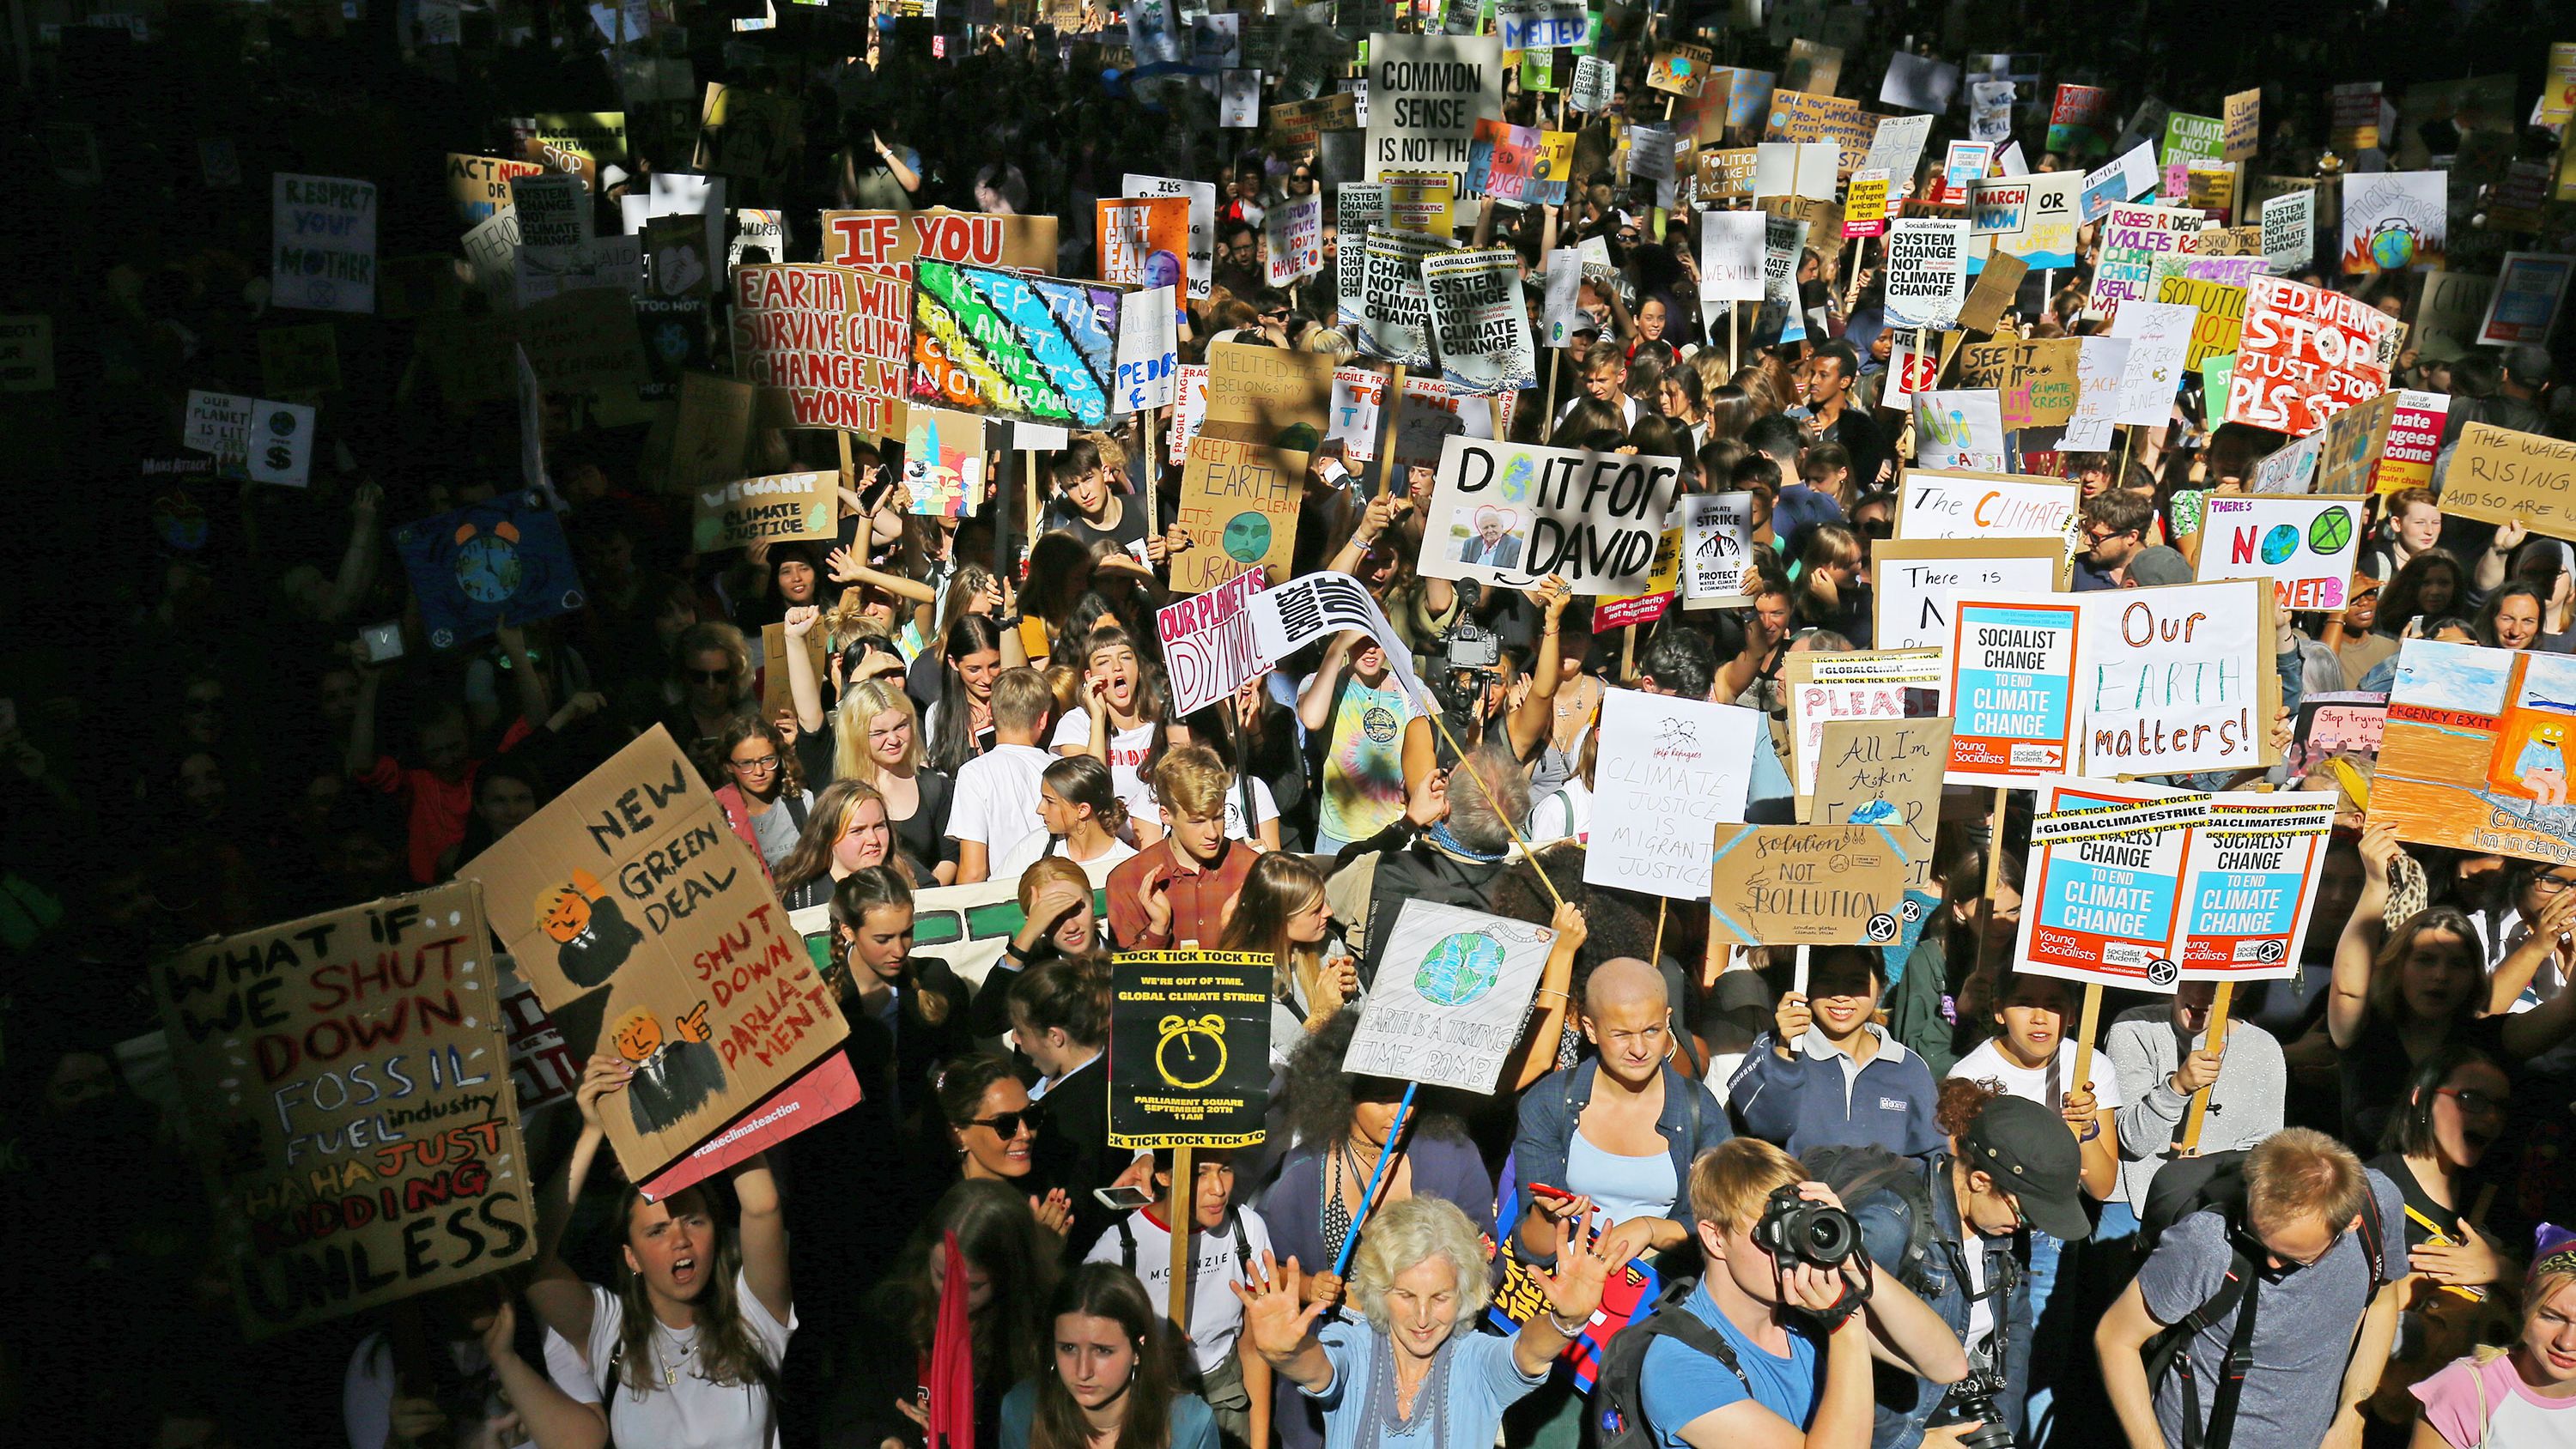 Protesters participate in the UK Student Climate Network's demonstration in London.